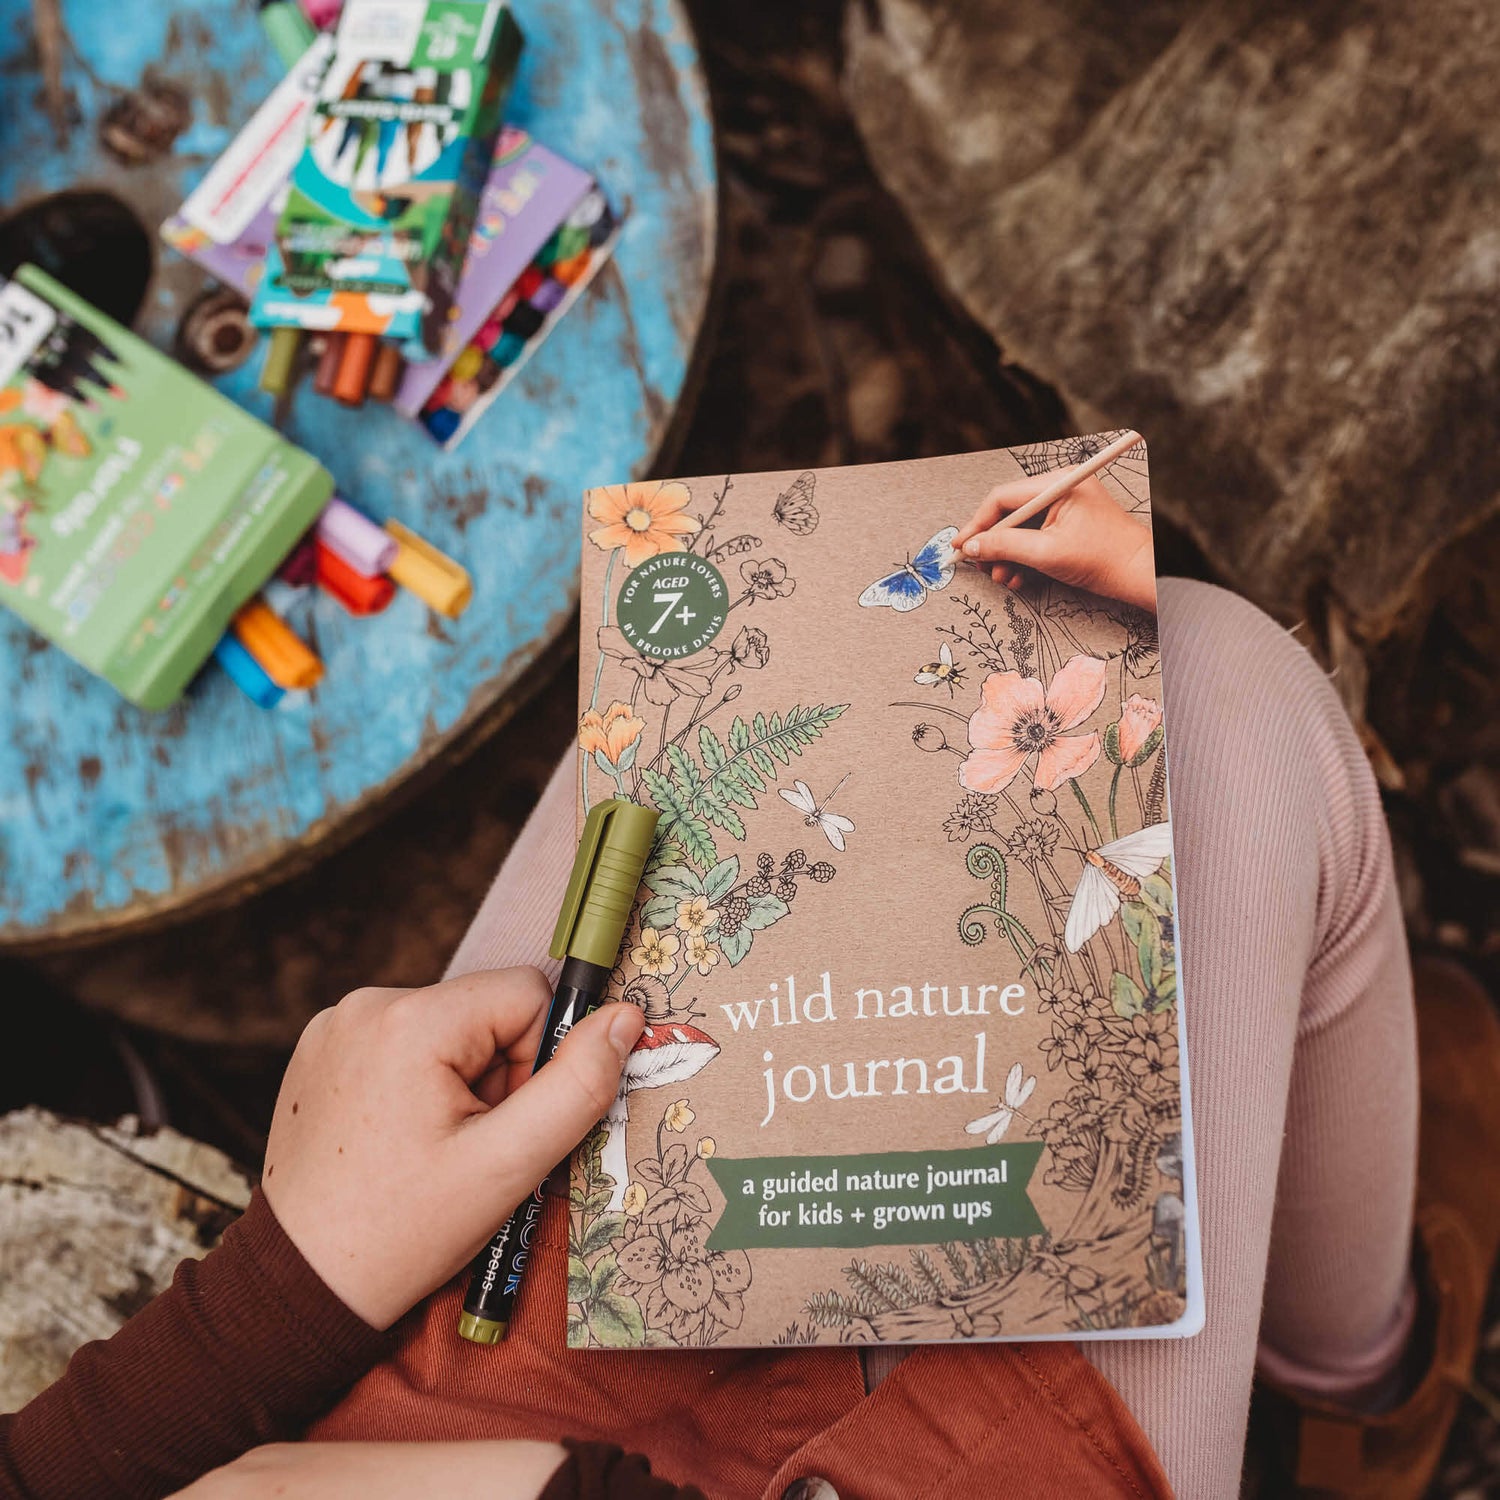 Child holding Wild Nature Journal, a guided nature journal for kids and grown ups is made in Australia by Your Wild Books.